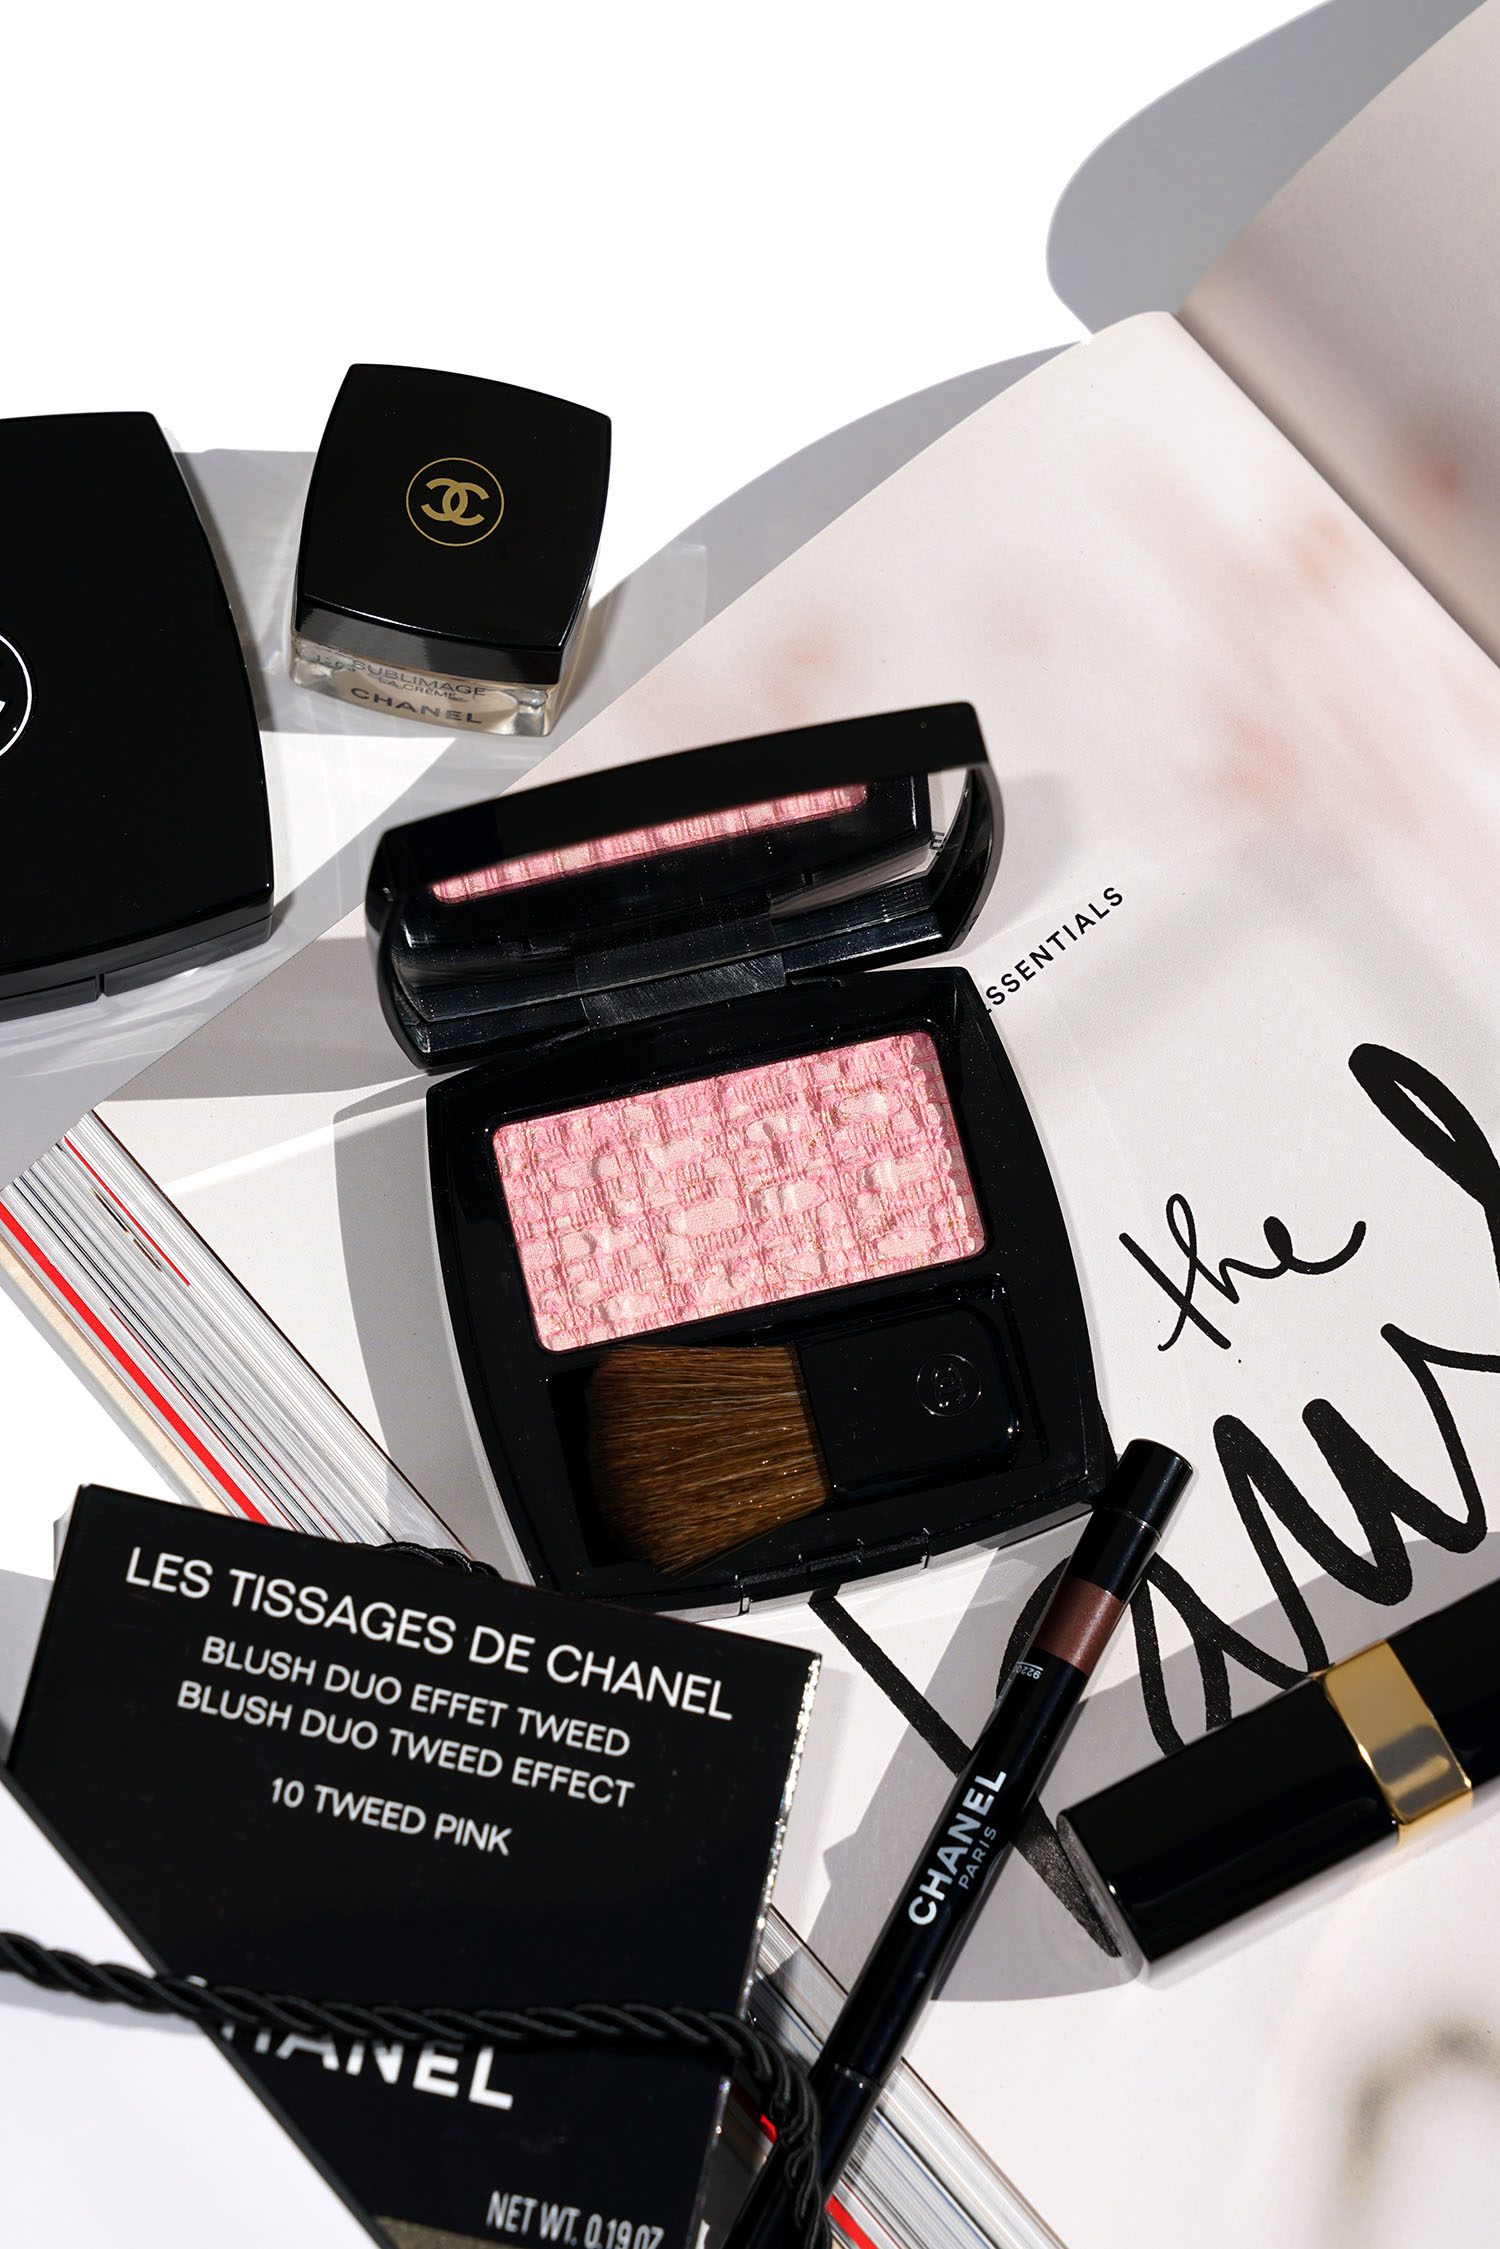 Chanel Les Tissages de Chanel Tweed Pink - The Beauty Look Book